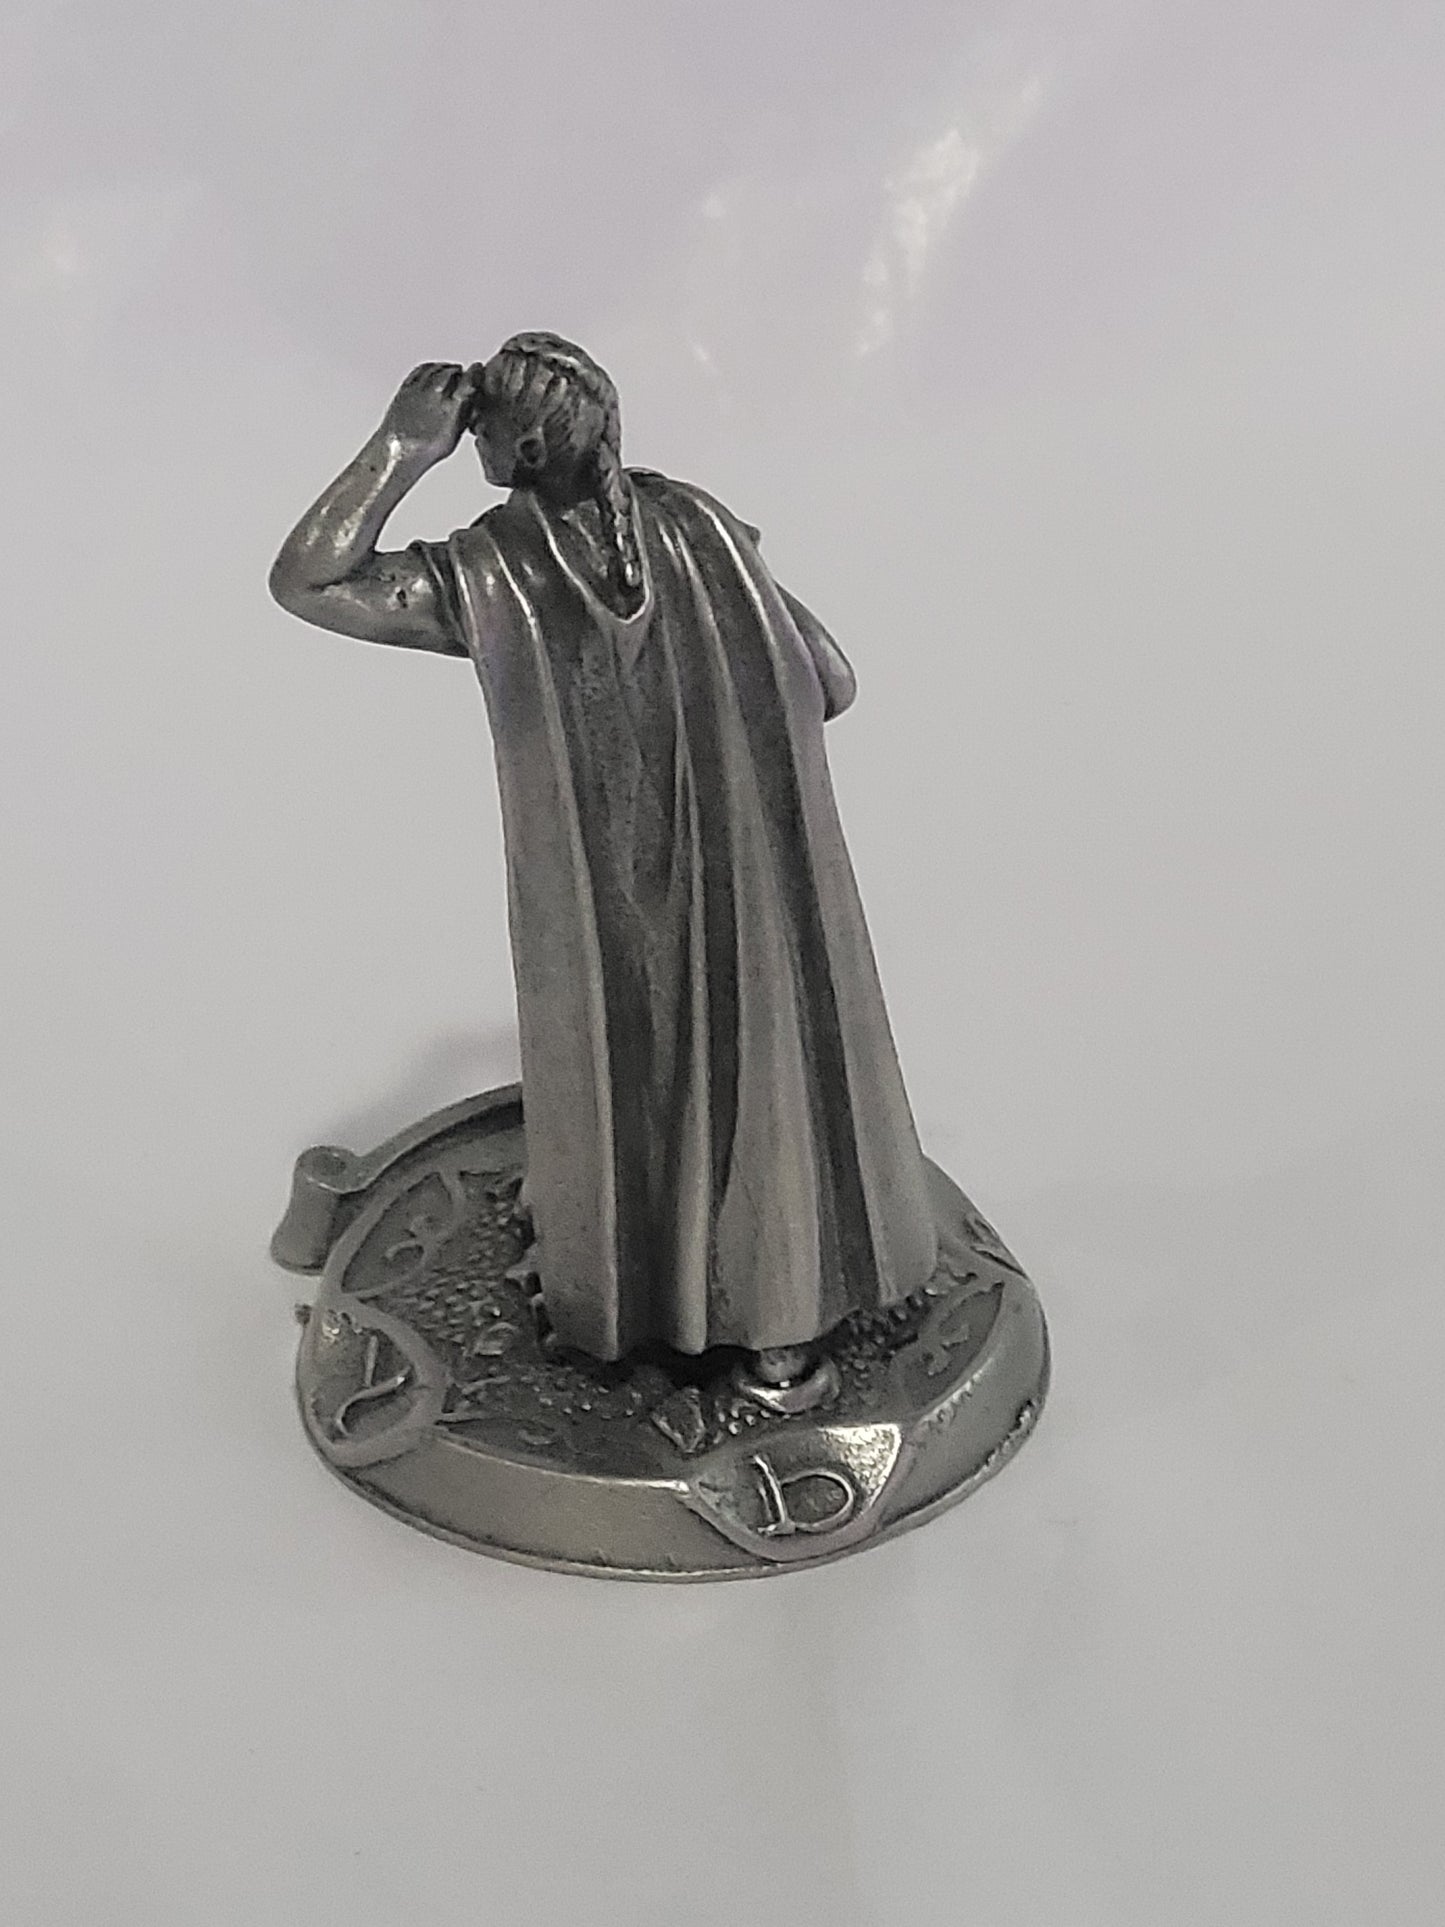 Gildor from the Lord of the Rings by Rawcliffe, Pewter Figurine